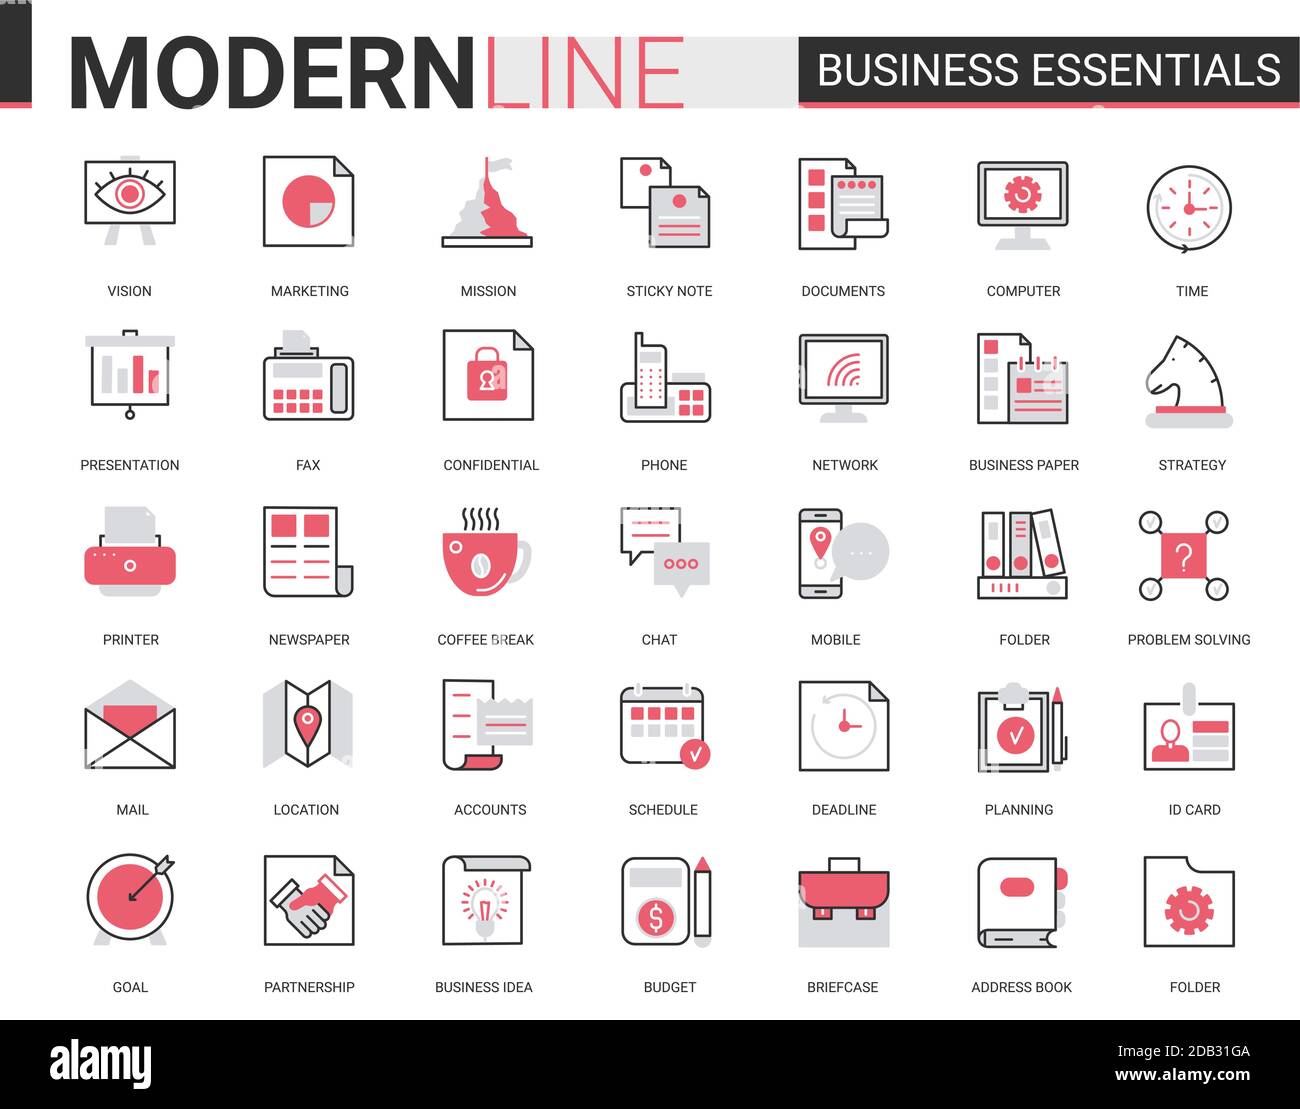 Business thin red black flat line icon vector illustration set. Business essential website outline pictogram symbols collection with office objects, equipment and documents for financial development Stock Vector